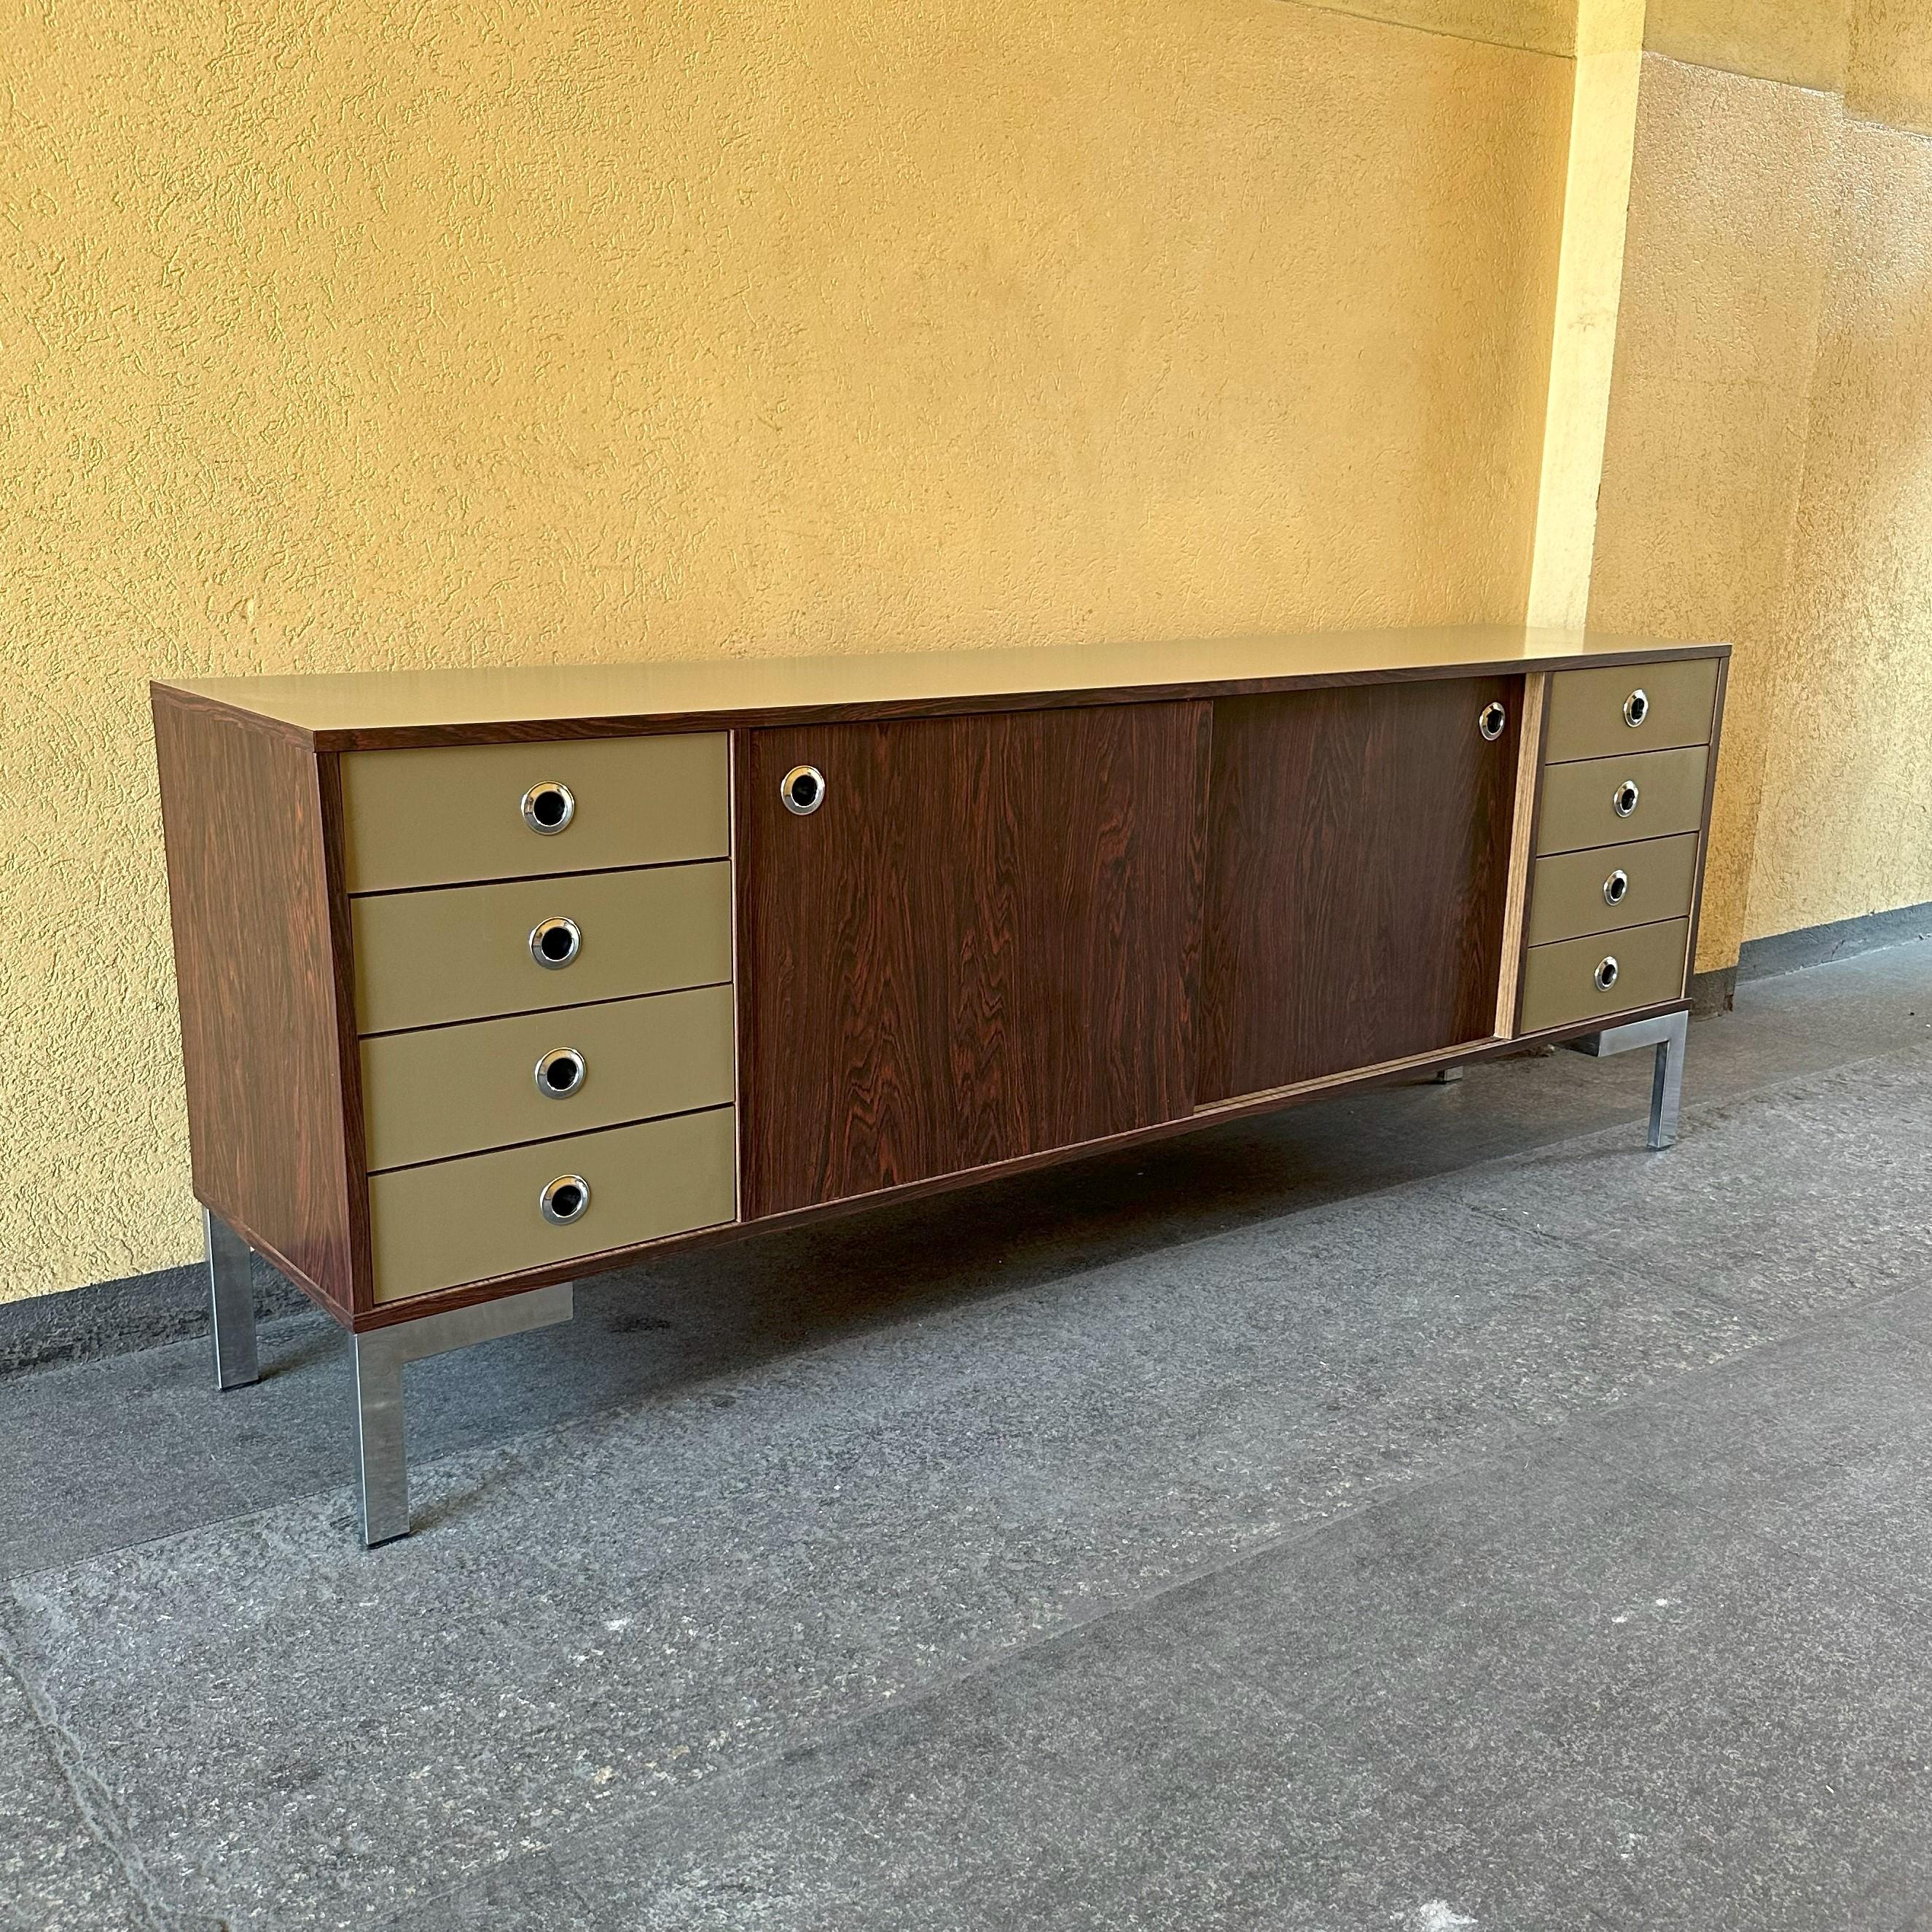 Sideboard from the seventies, Italian manufacture.
Seventies sideboard in laminate, Italian manufacture sideboard has chromed steel legs.
Laminate has a visual effect similar to rosewood
On the sides it has 4 drawers and in the center 2 cabinets